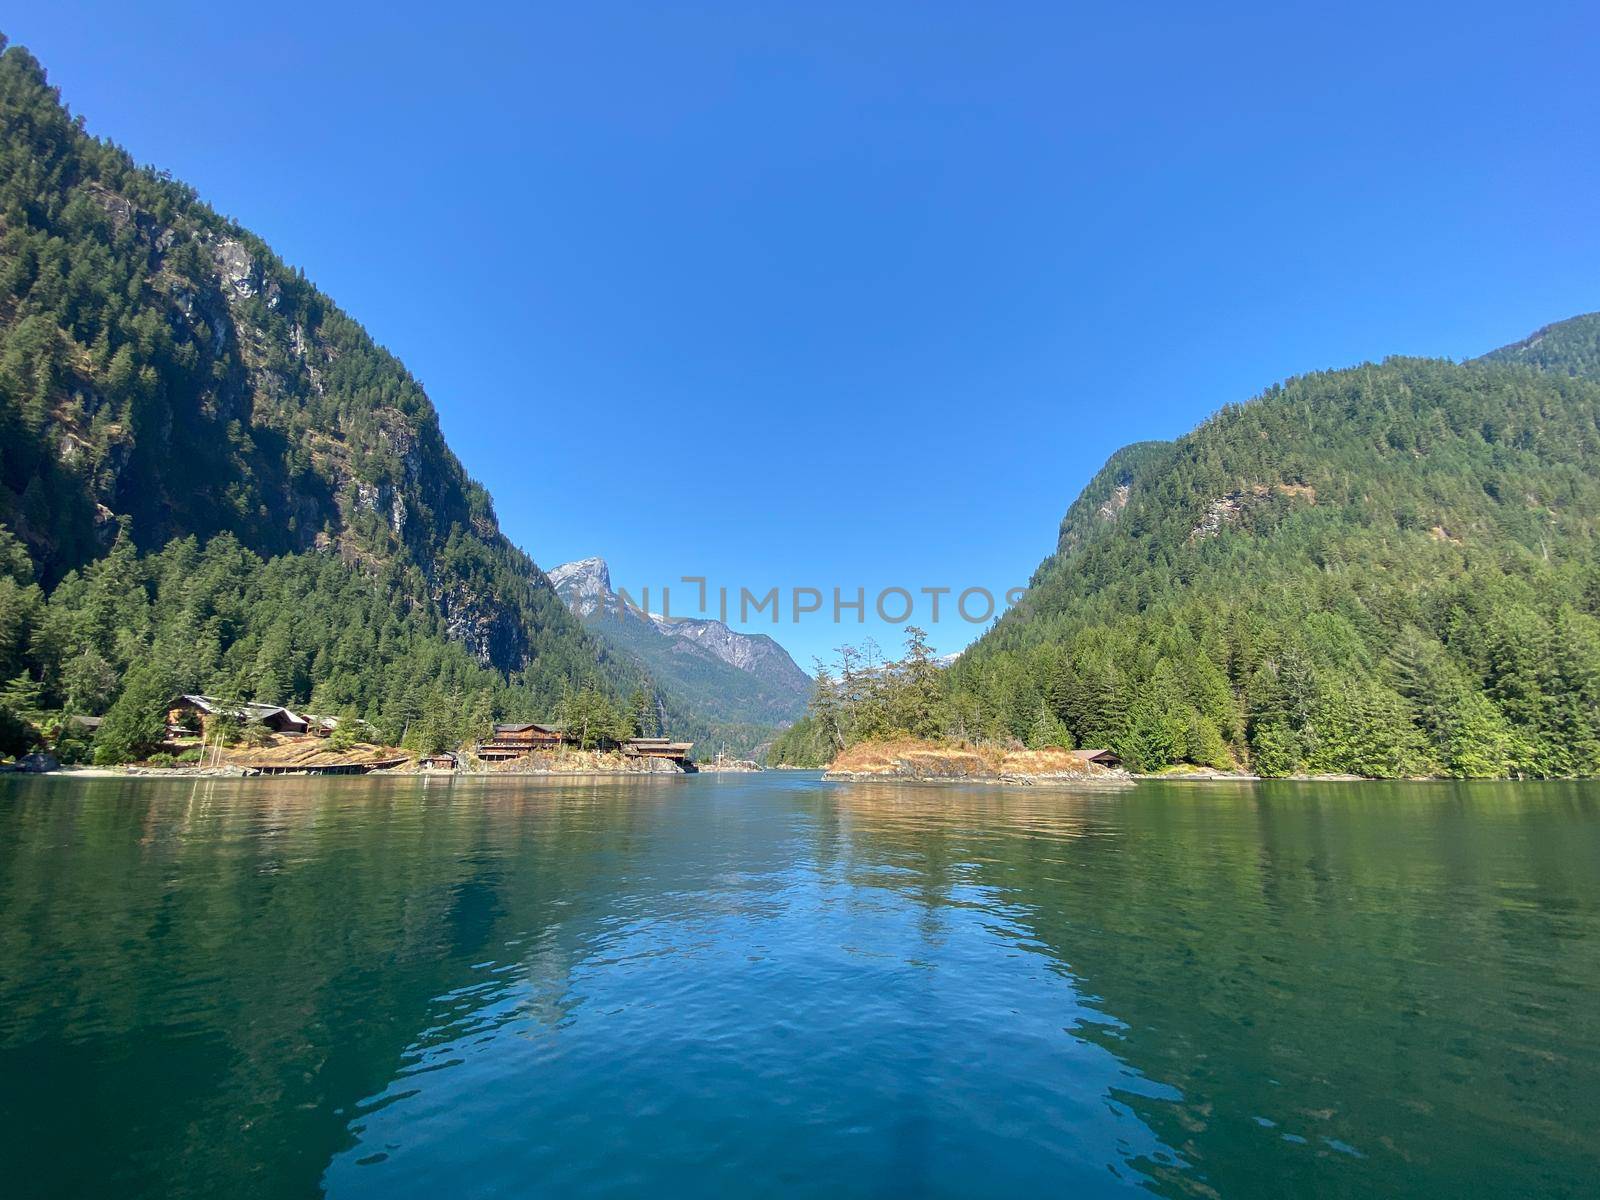 View of Malibu Rapids, entrance to Princess Louisa Inlet in British Columbia, Canada with a view of Malibu Lodge by Granchinho